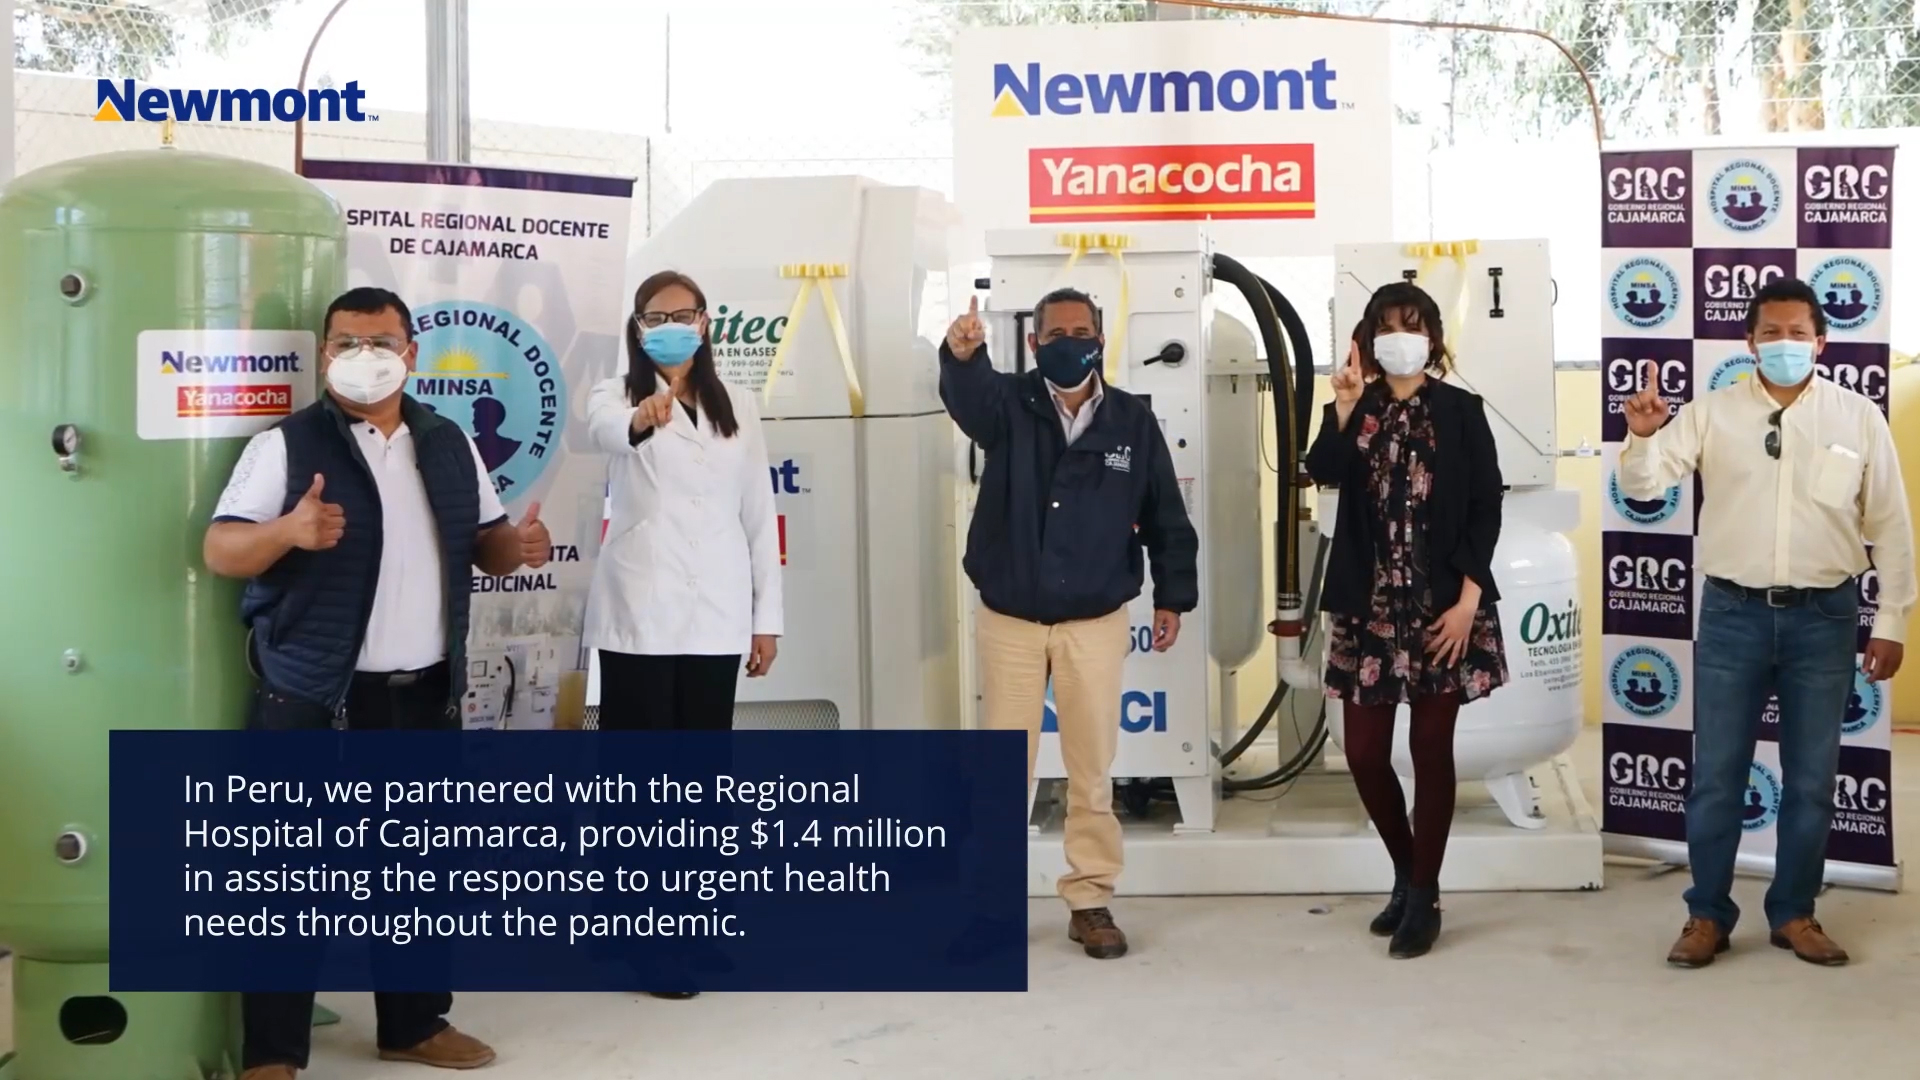 Highlights from Newmont's Completion of the $20 Million Global Community Support Fund